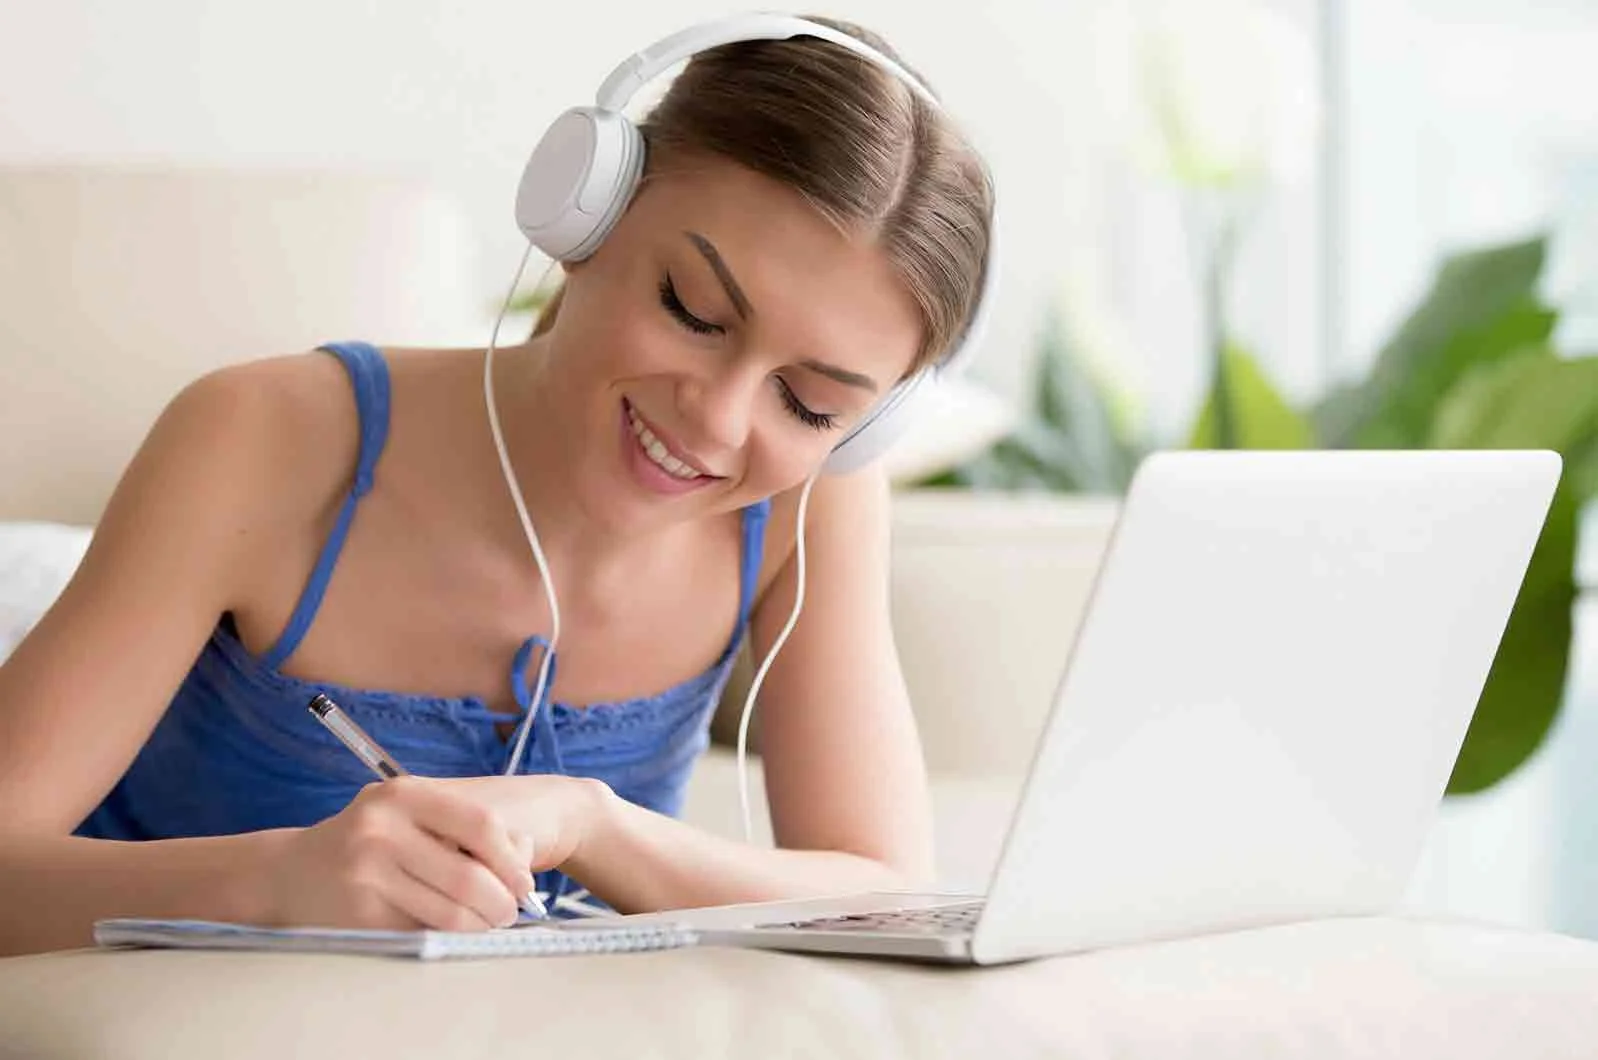 Girl with headphones writing on a notebook, with a laptop. Concept of learning languages.